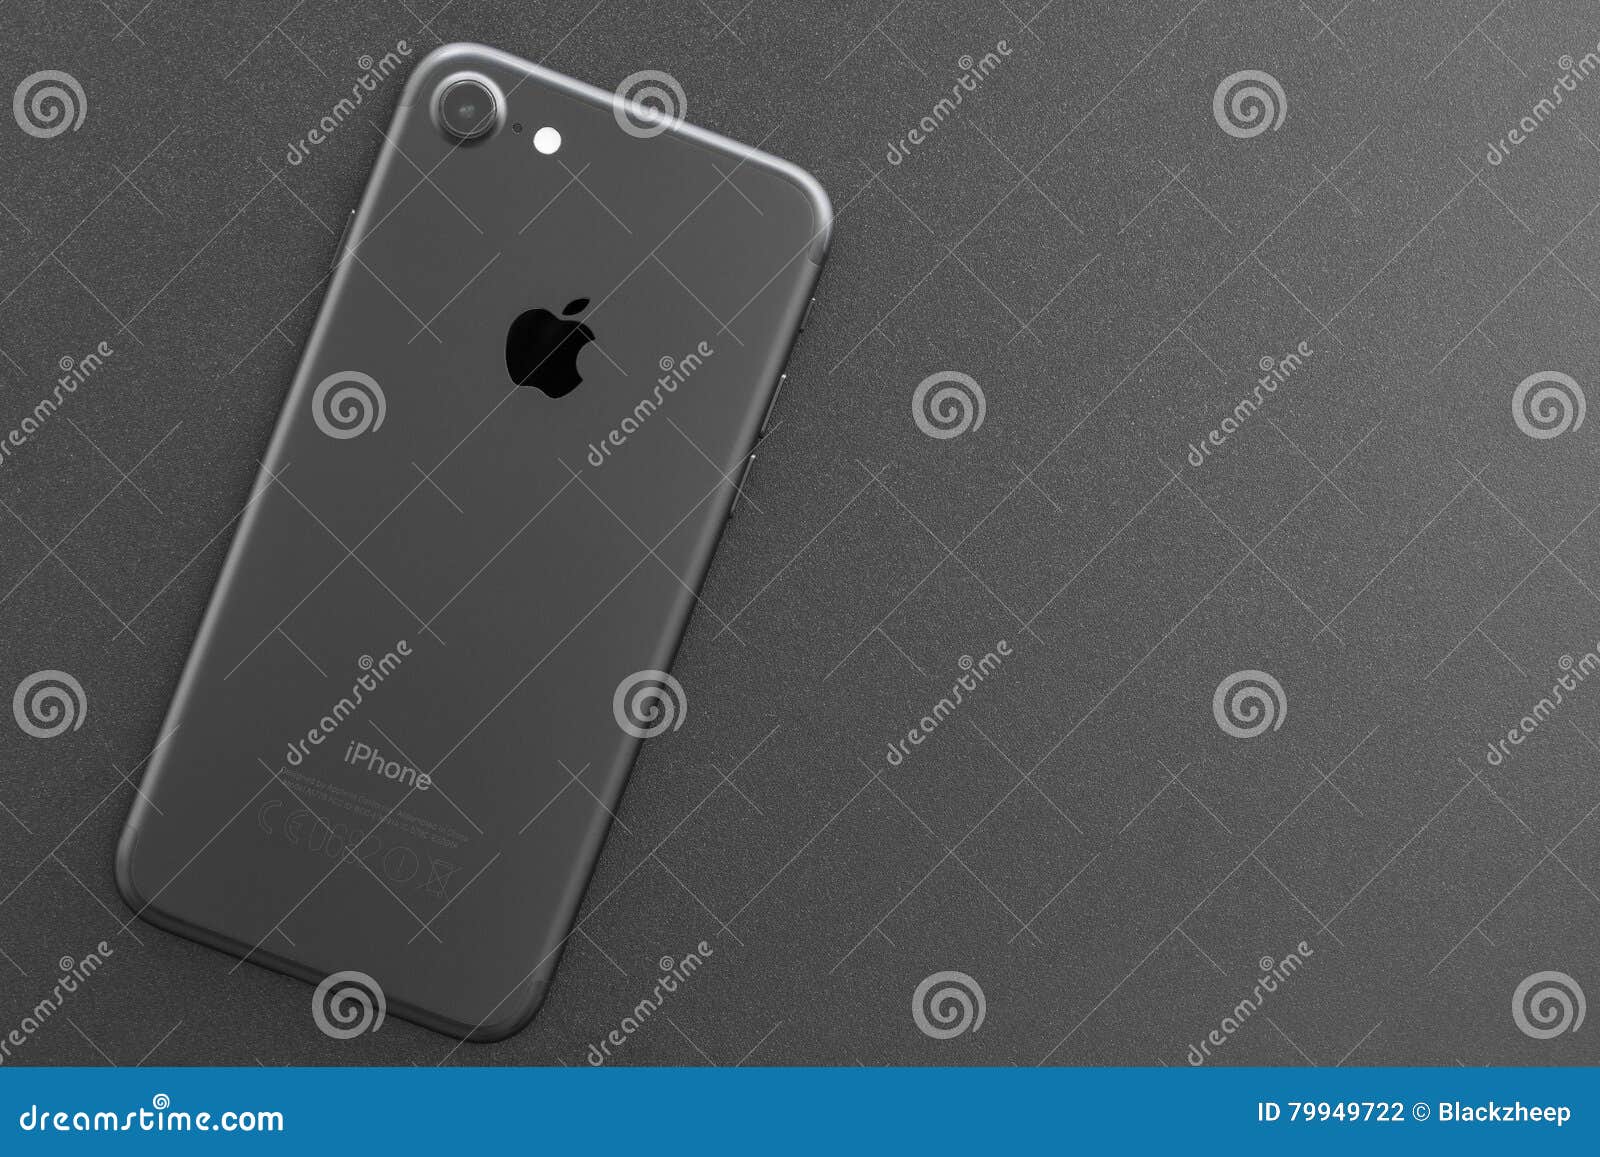 Iphone 7 Backside on Top View Editorial Photography - Image of business ...